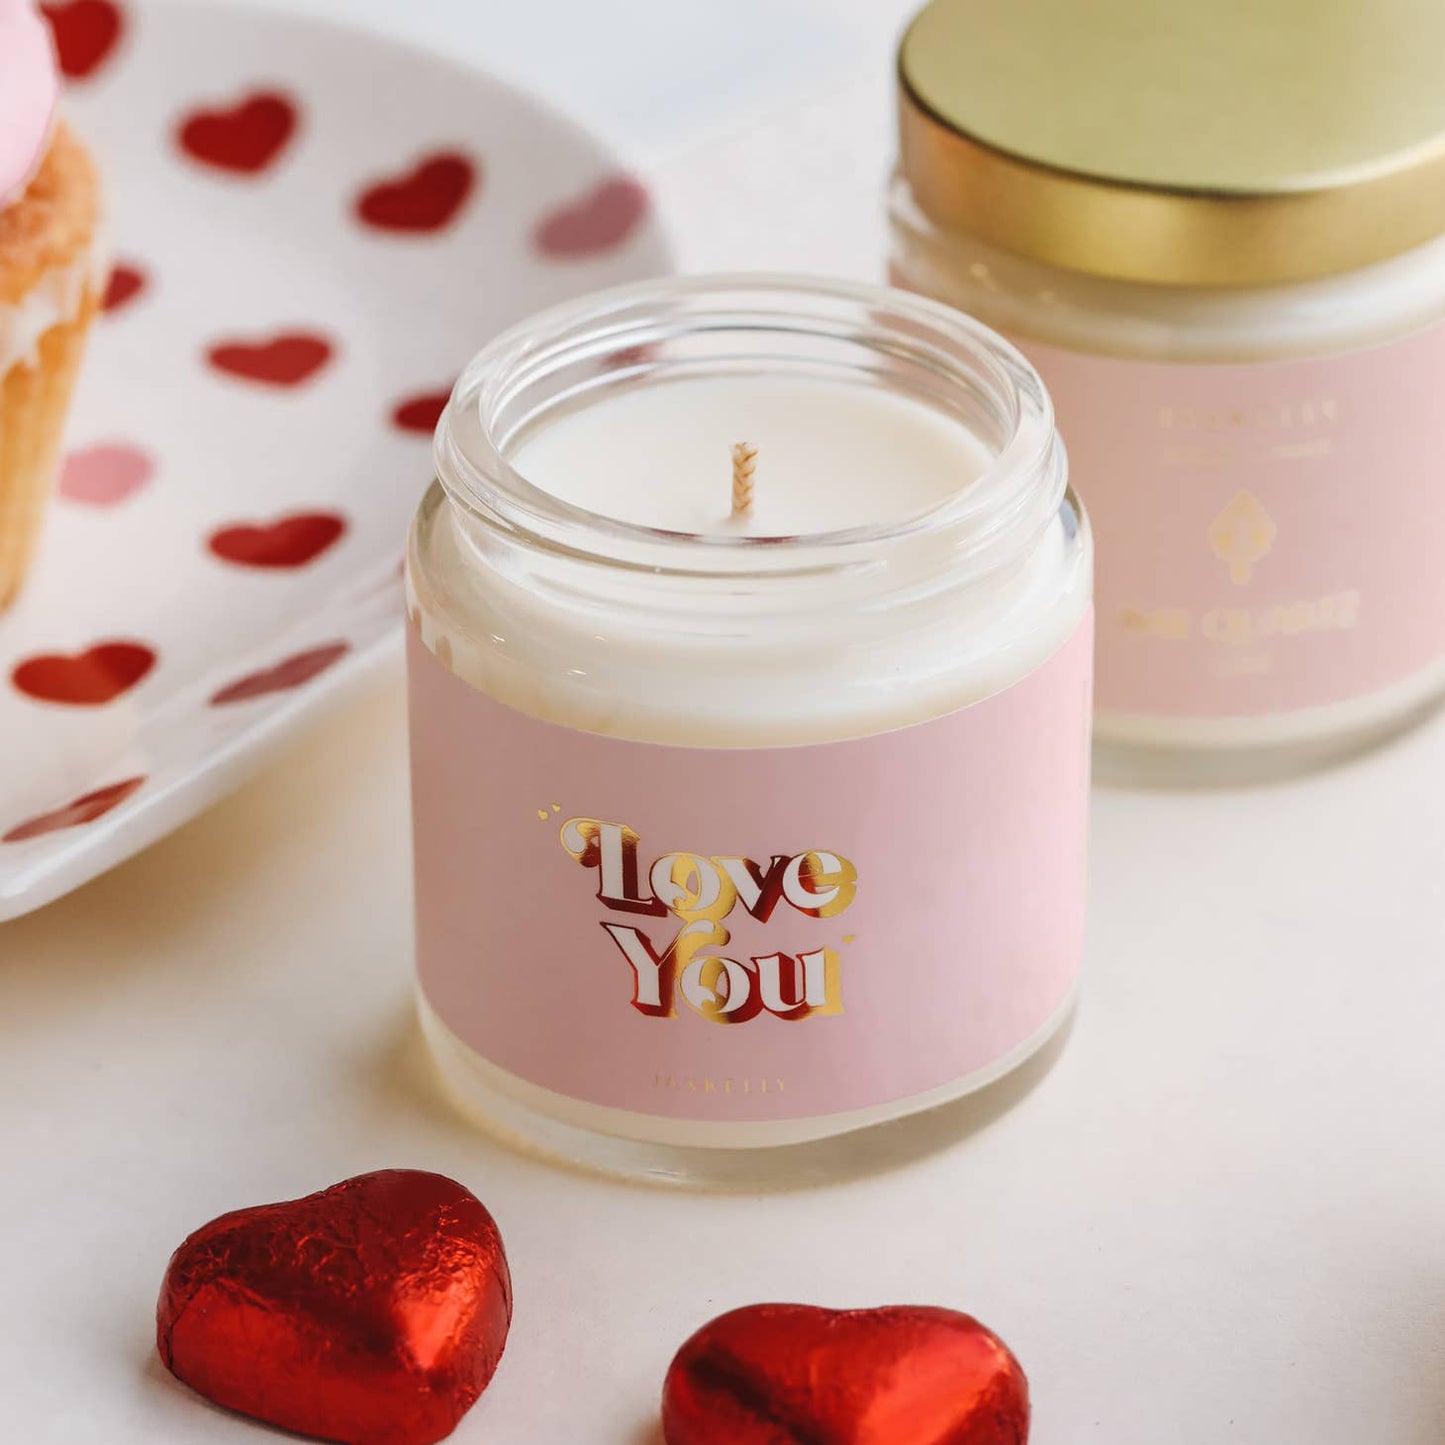 JAXKELLY LOVE YOU CANDLE 4 OUNCE